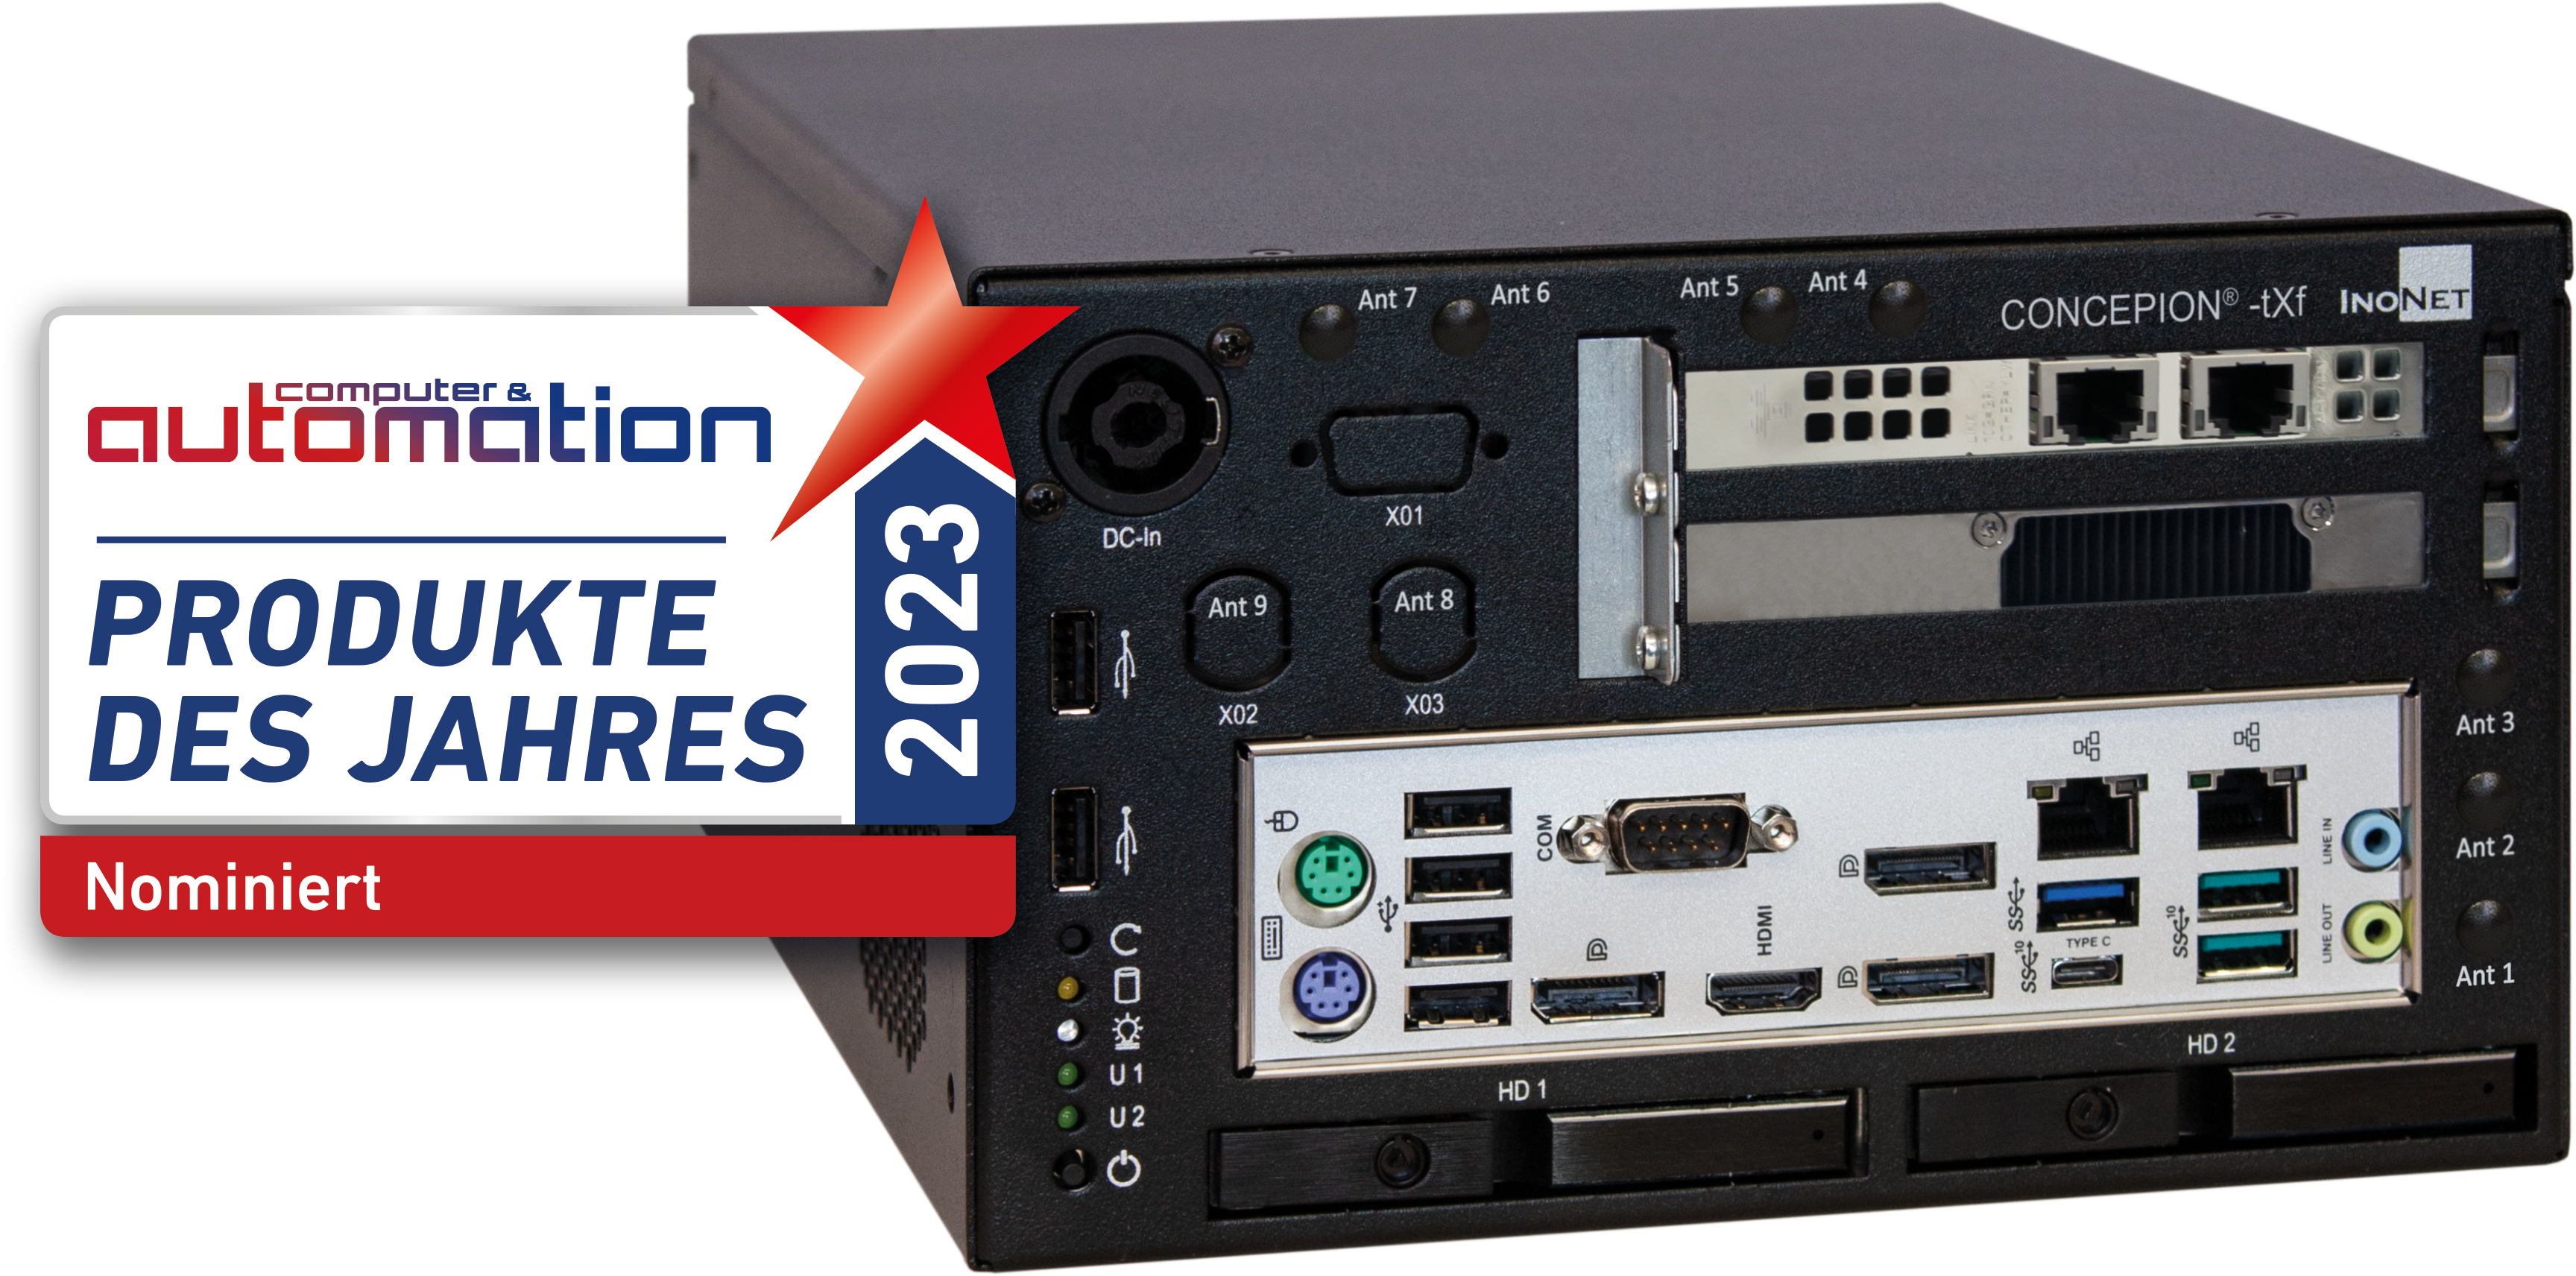 Concepion-tXf-L-v3-12Gen-Product-of-the-year-23_front-side